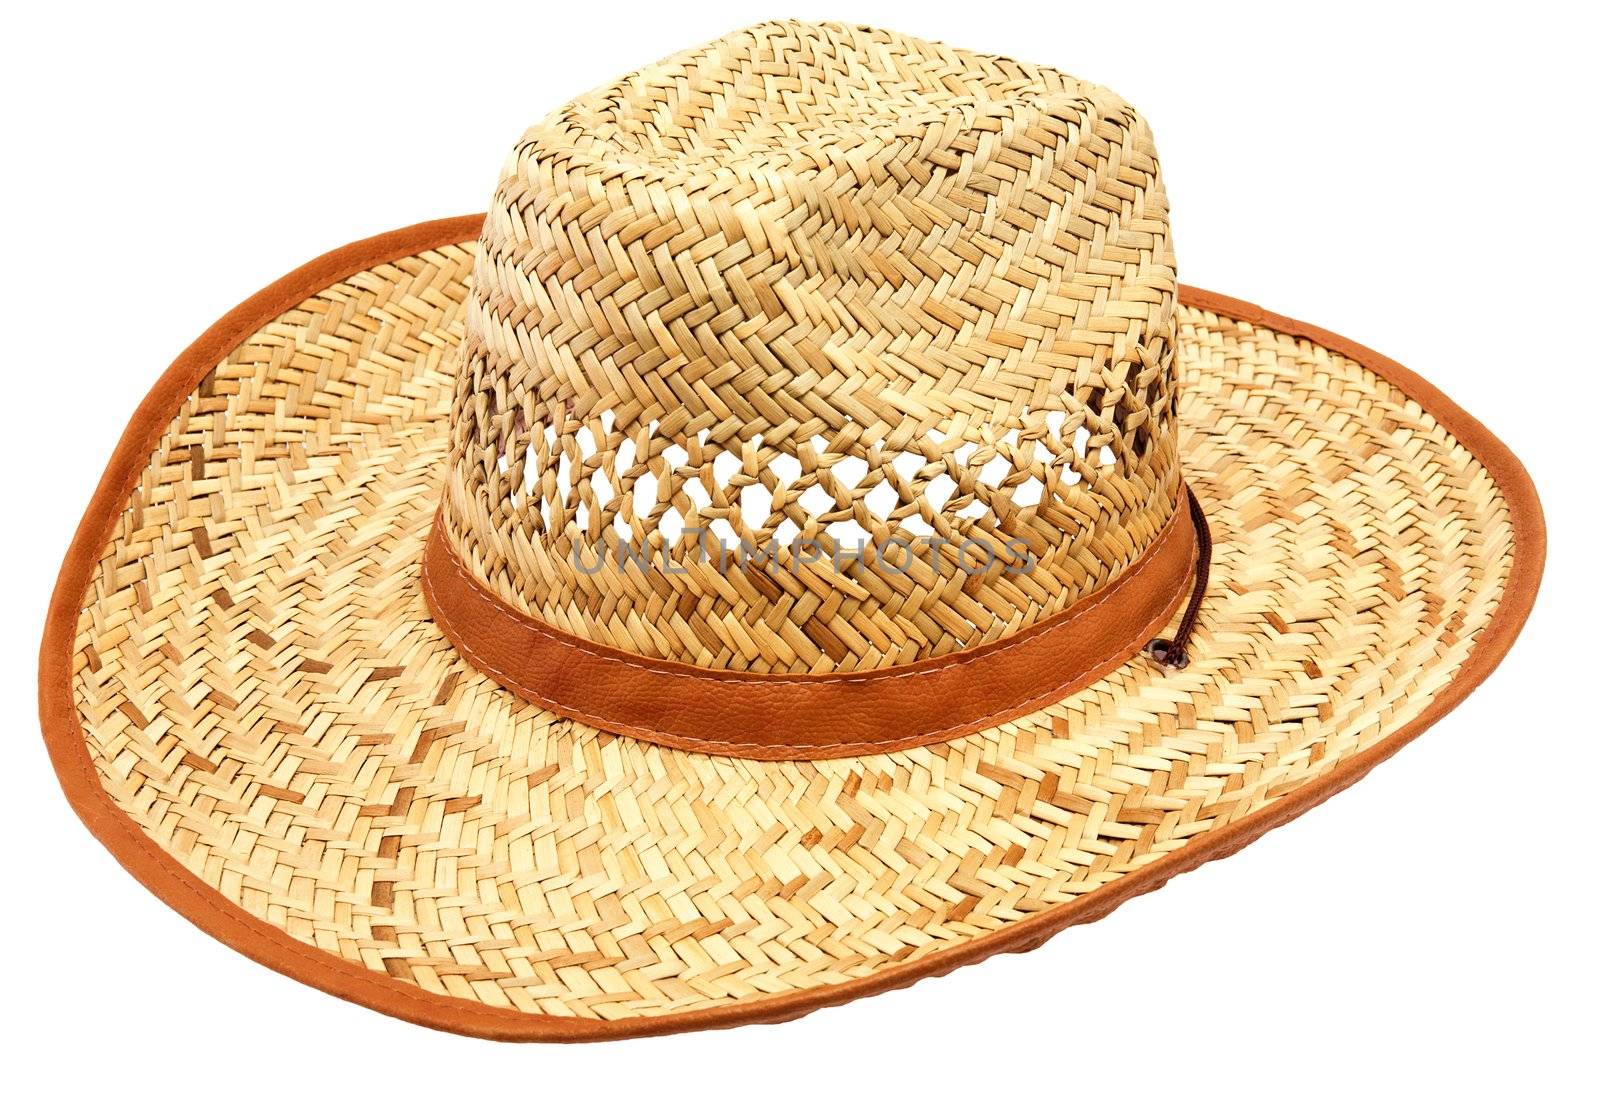 Lonely straw hat on a white background